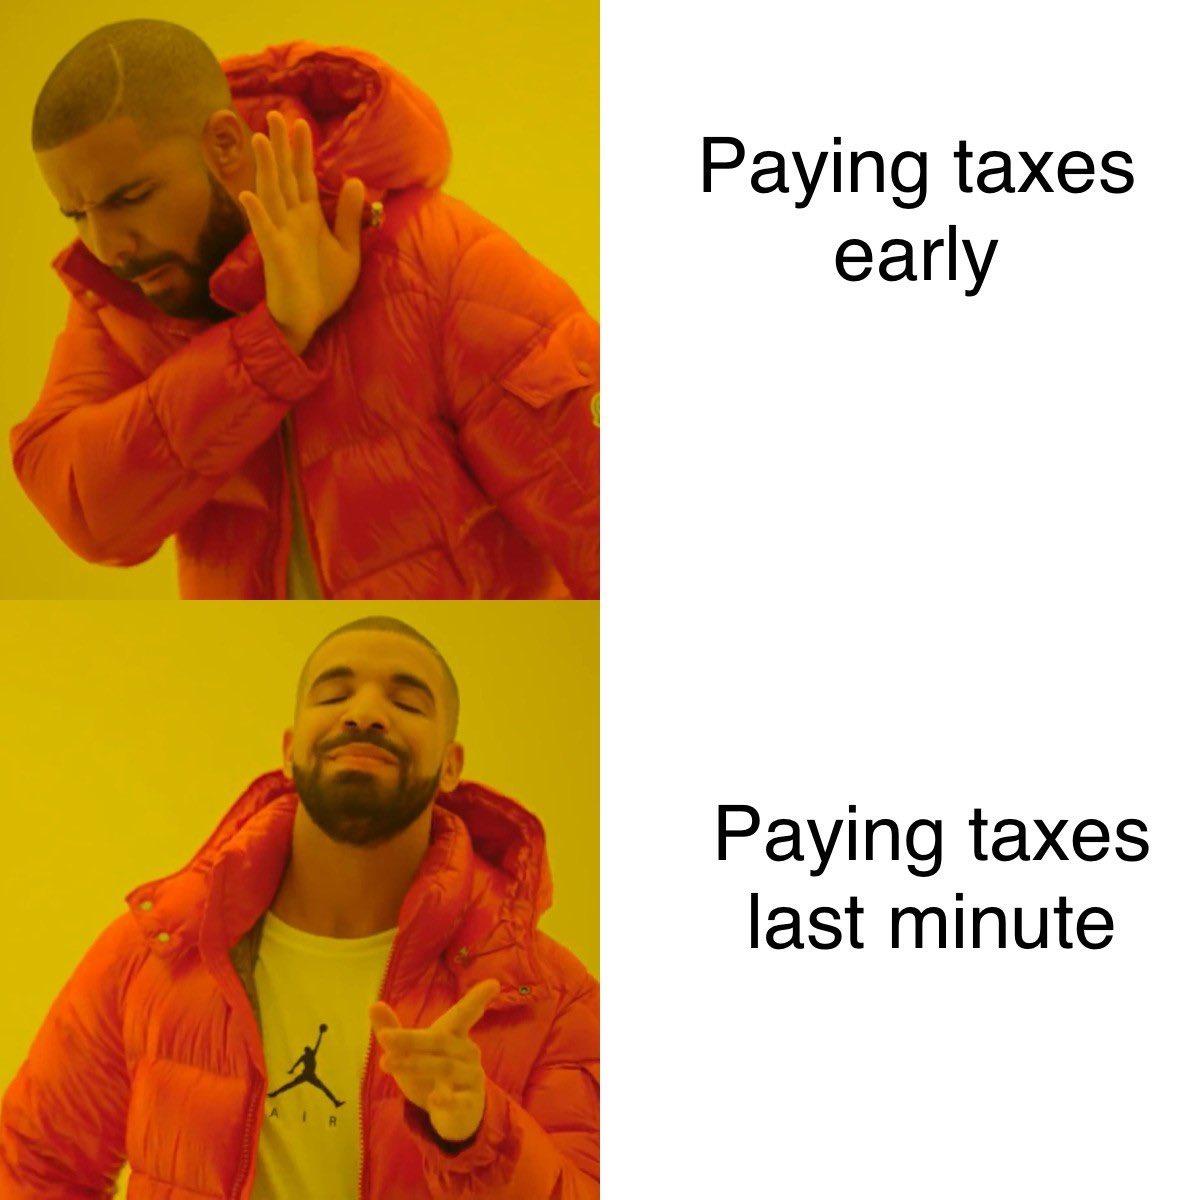 21 Tax Day Memes To Help You Cope With Tax Season Feels